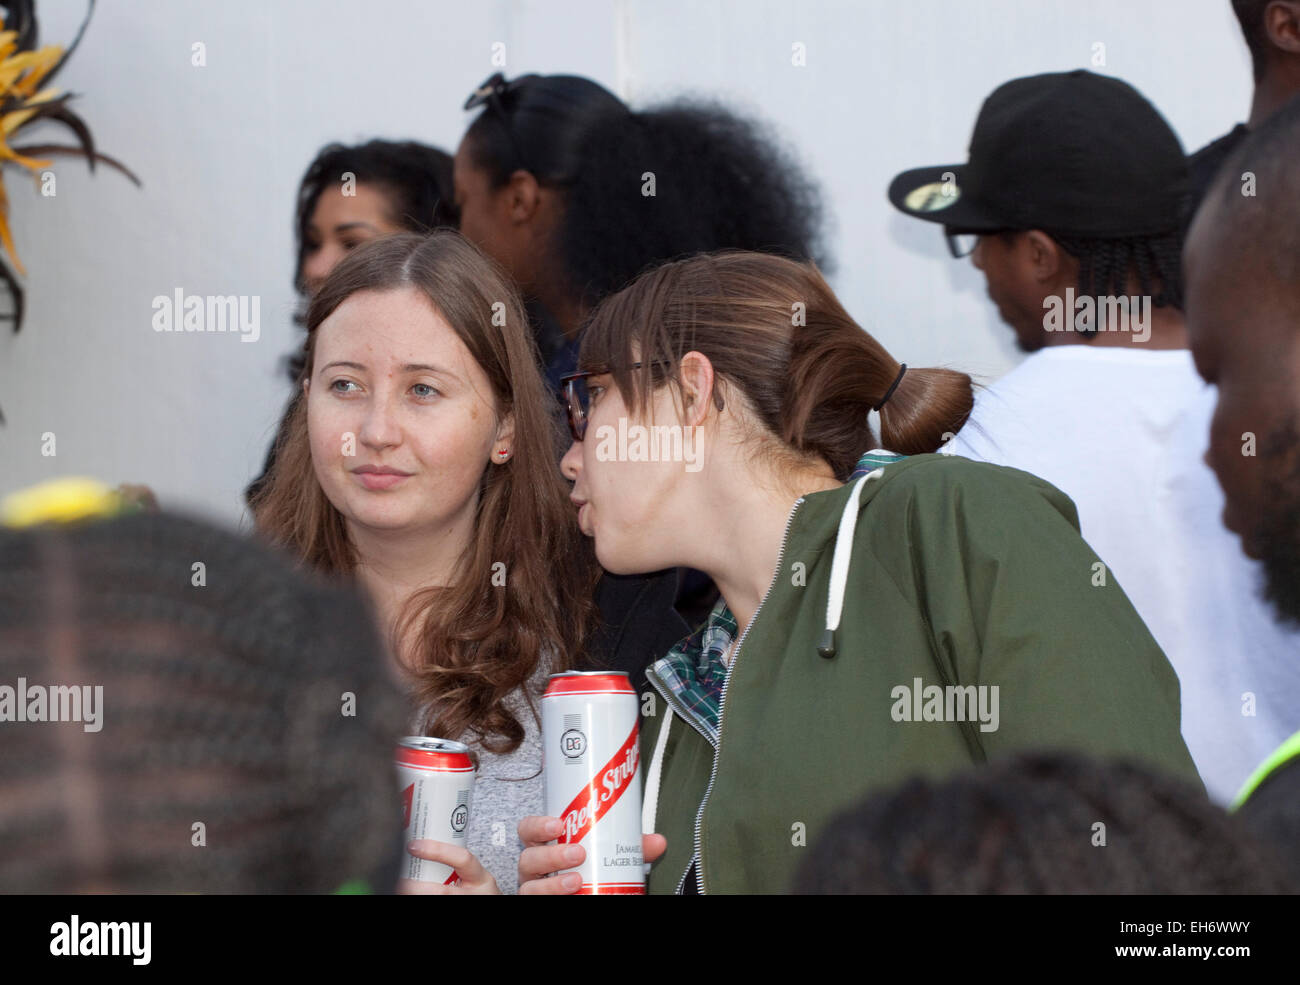 At the Hackney carnival two white young women drinking appropriately Jamaican Red Stripe beer. Stock Photo